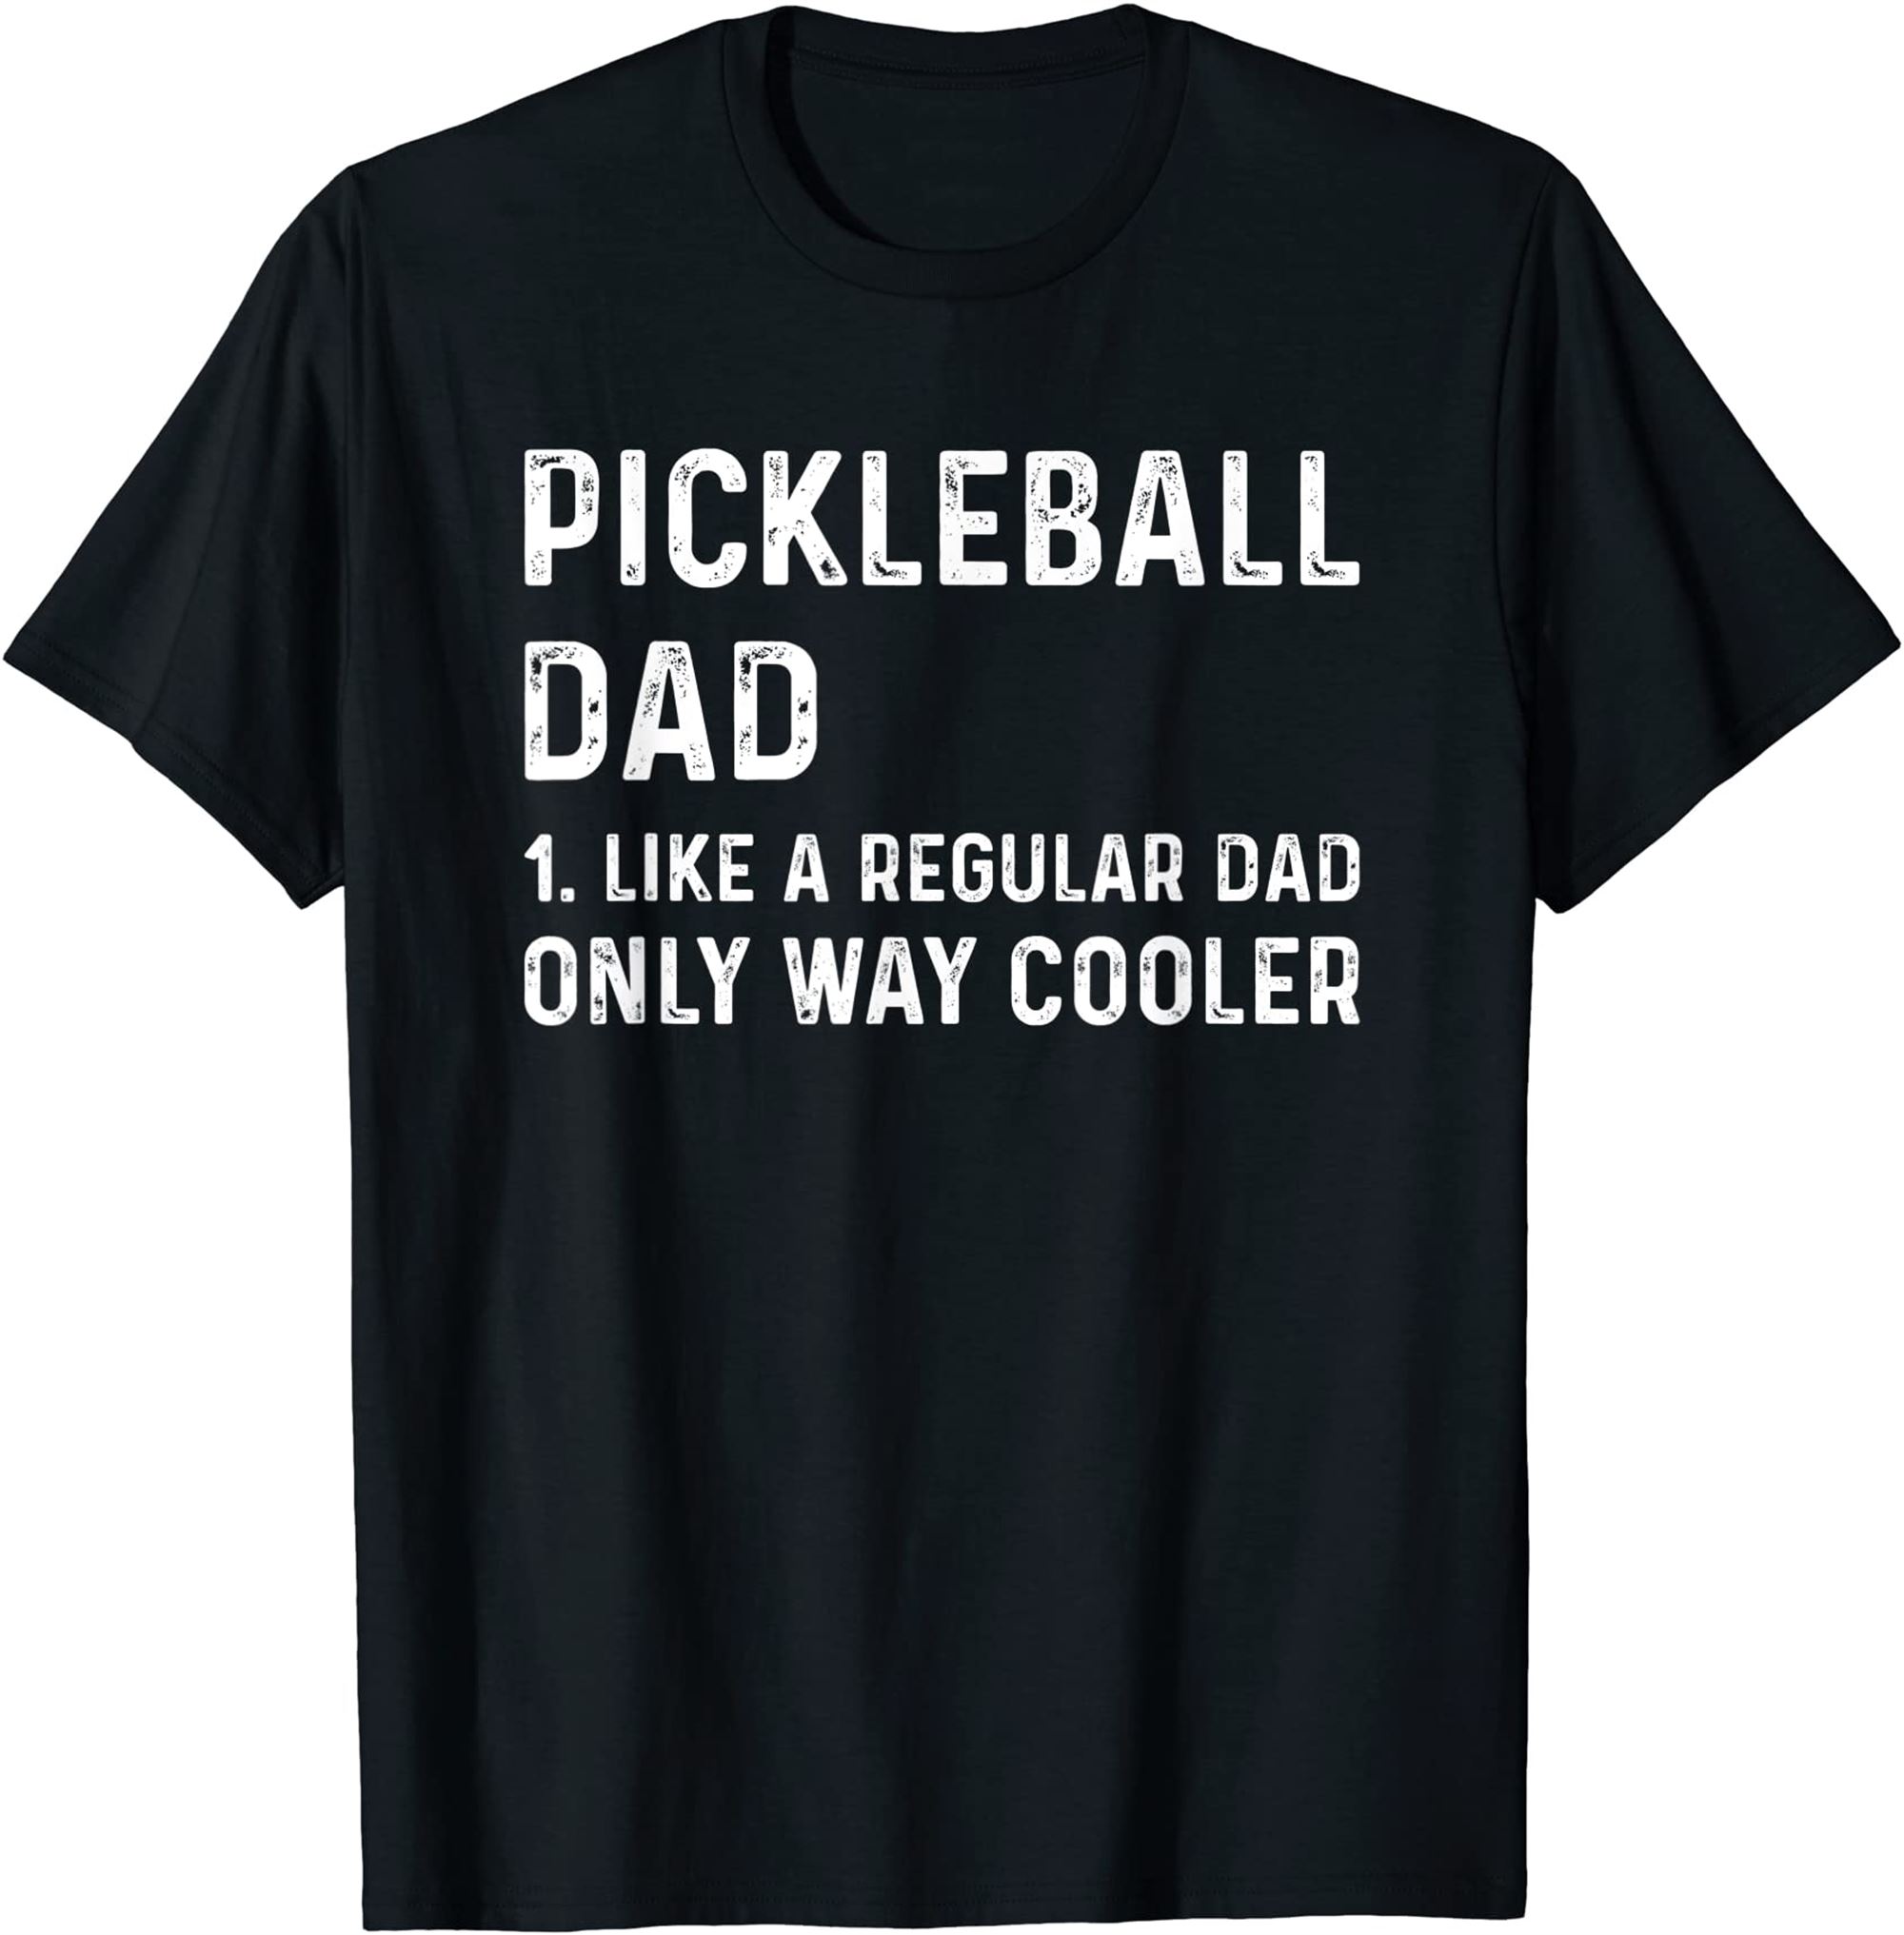 Mens Pickleball Dad Like A Regular Dad Only Way Cooler T-shirt Plus Size Up To 5xl